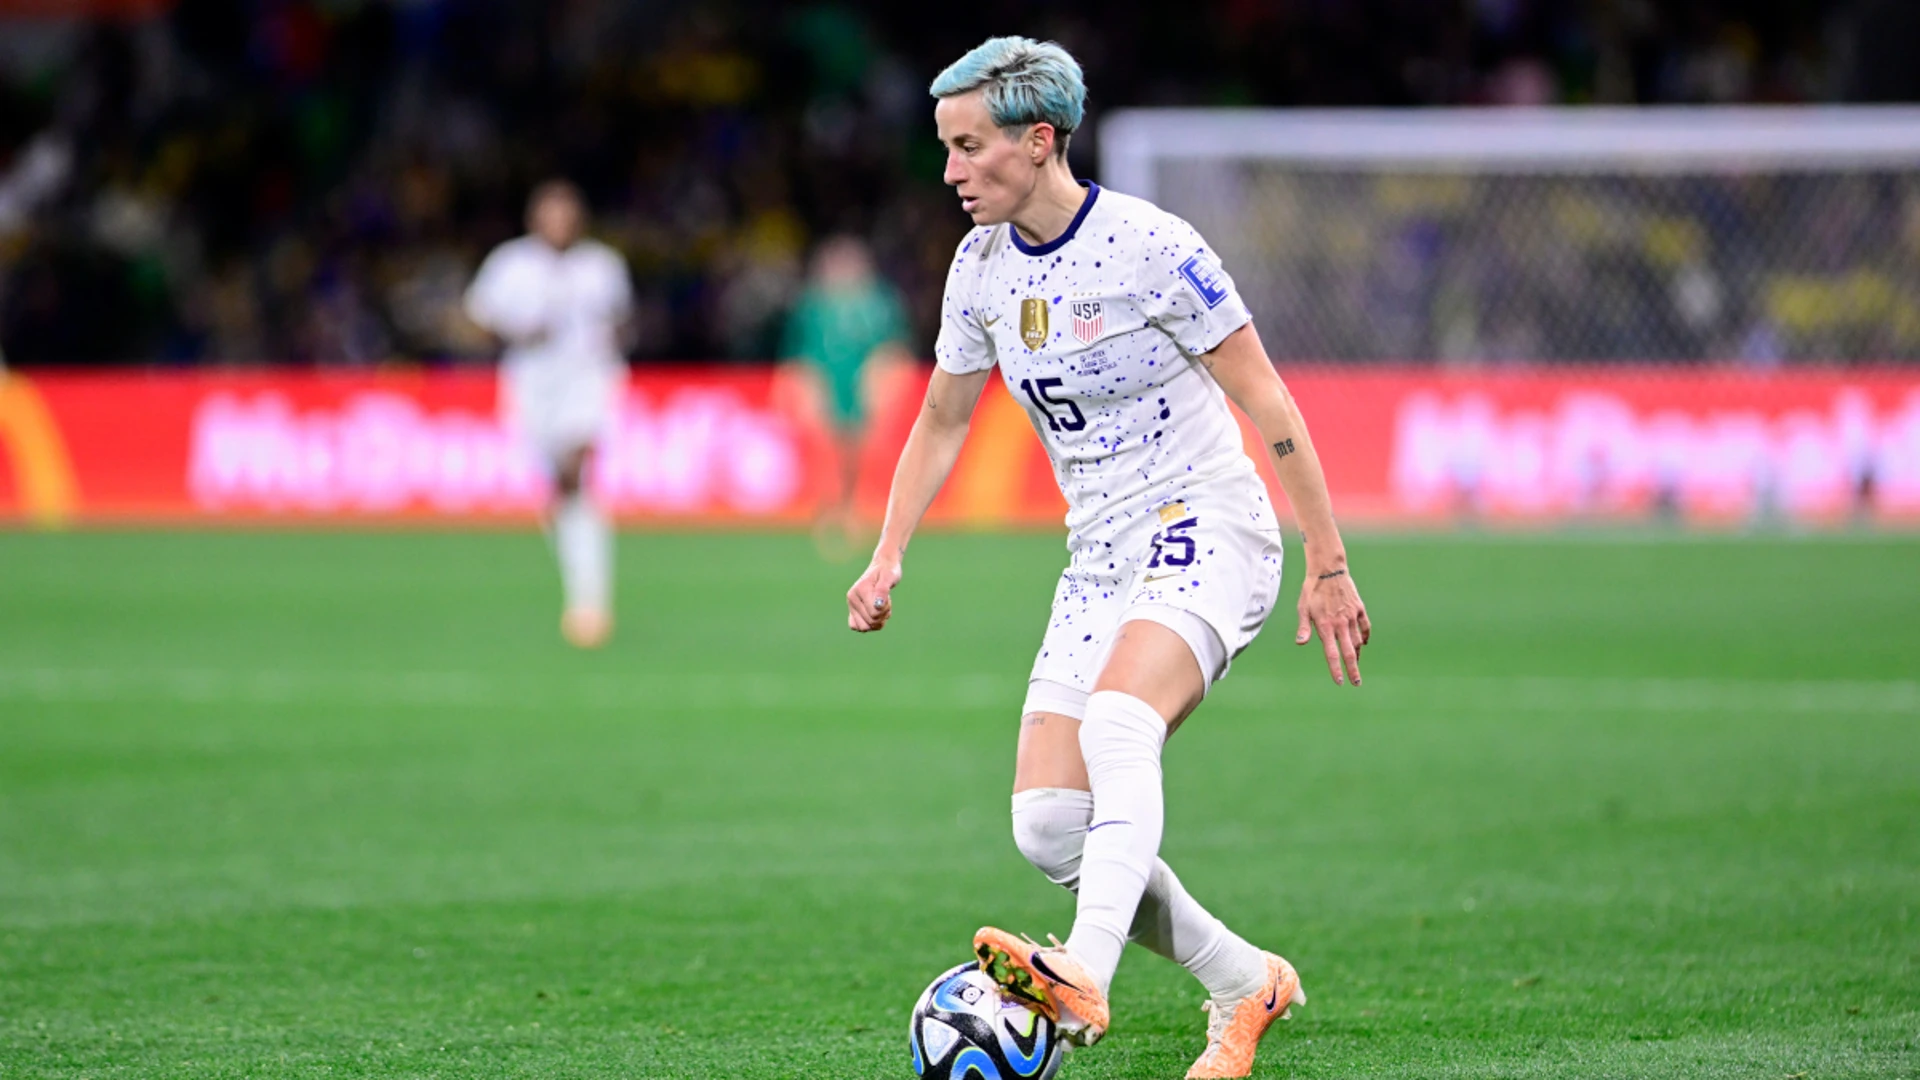 Rapinoe to play final game for US on September 24